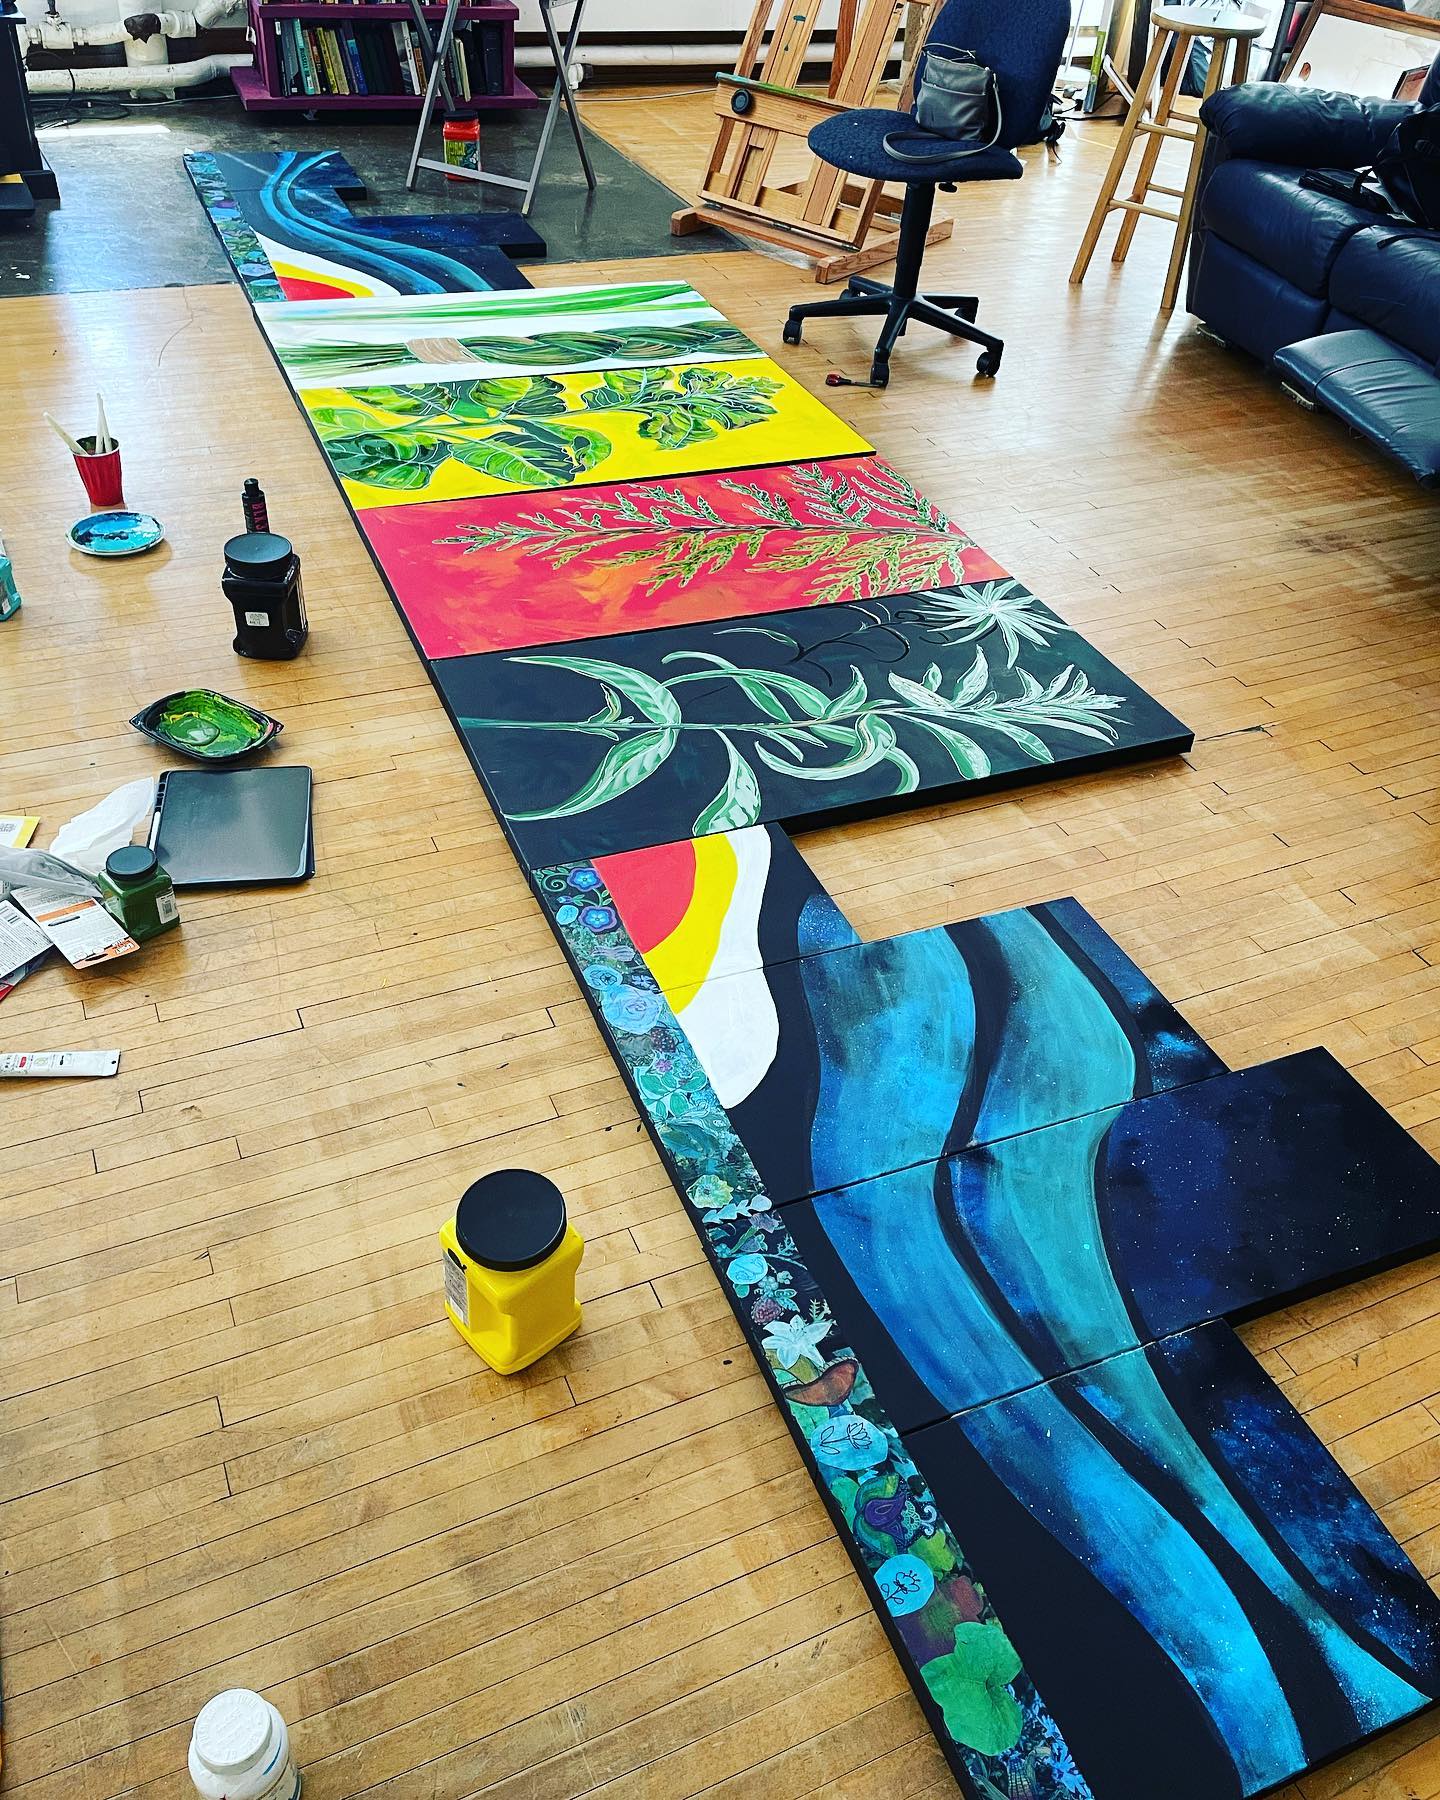 An image of paintings on a wooden floor.